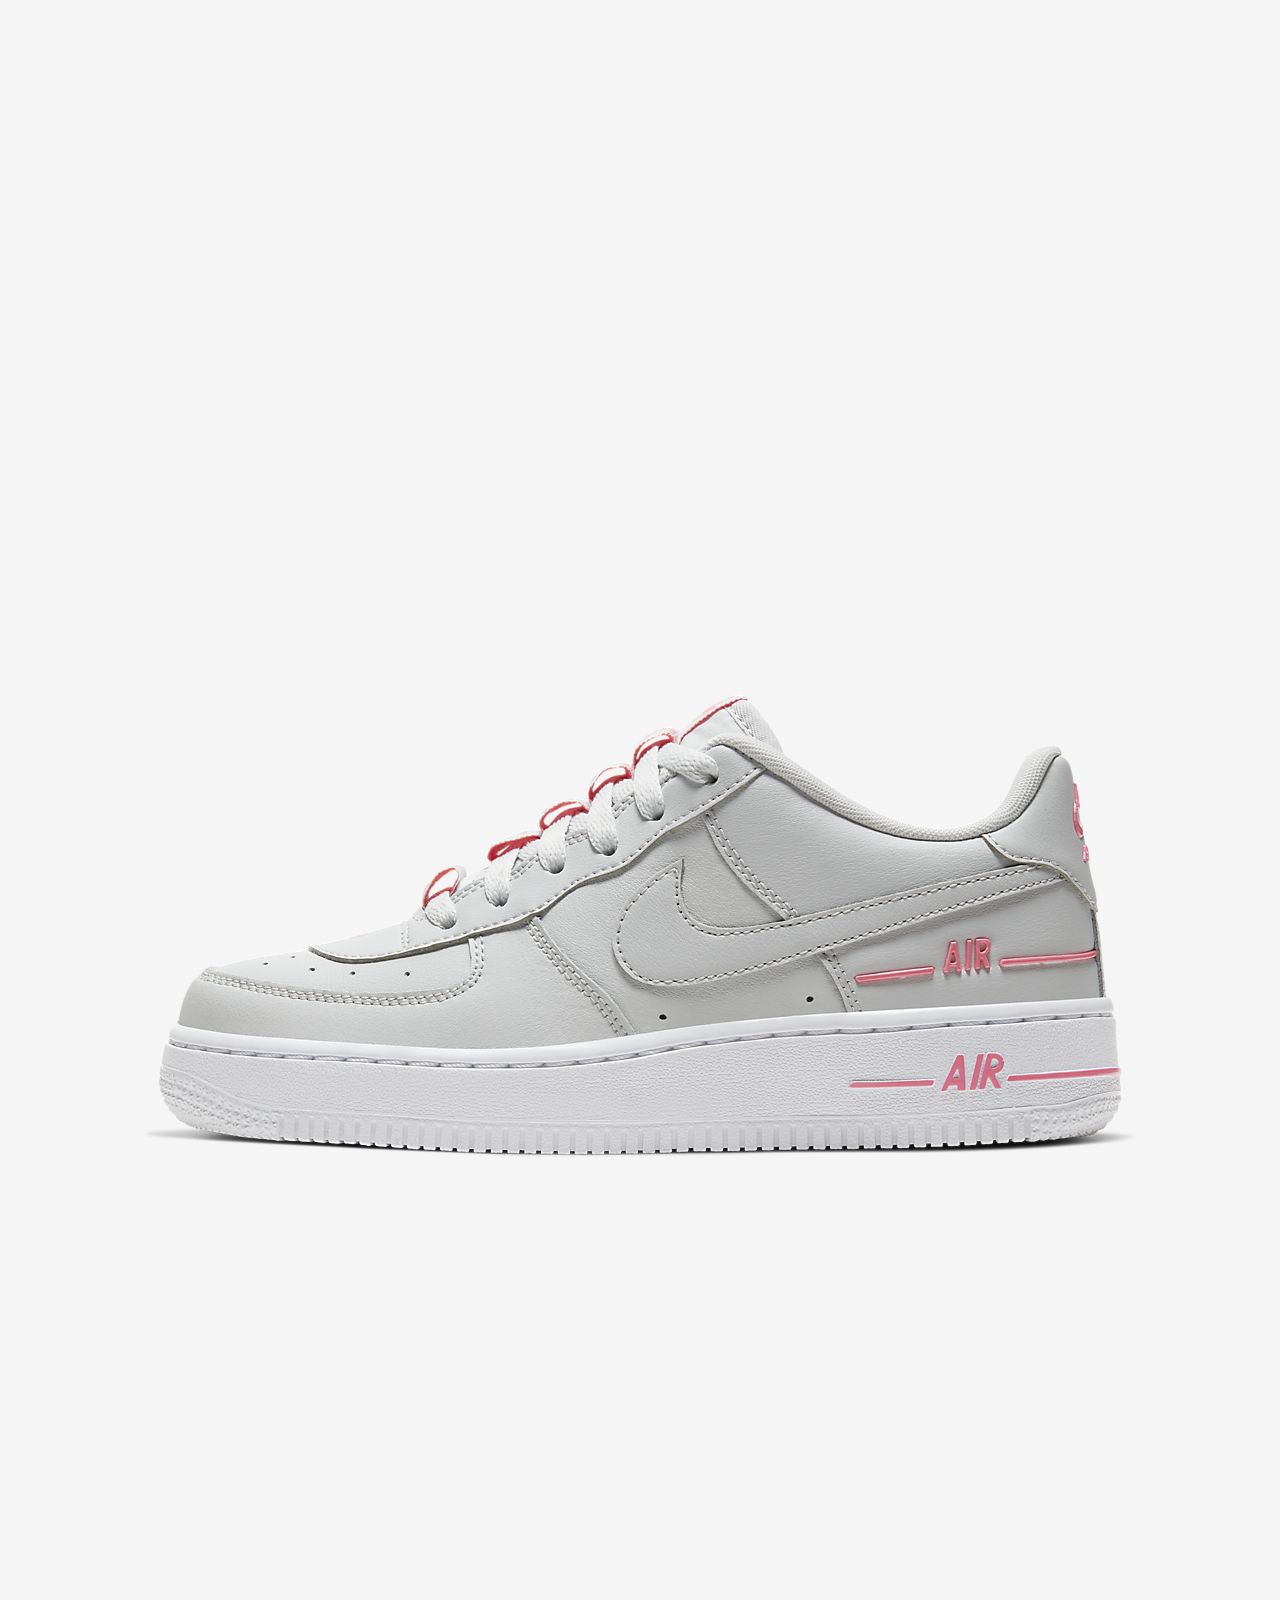 size 3 white air force 1